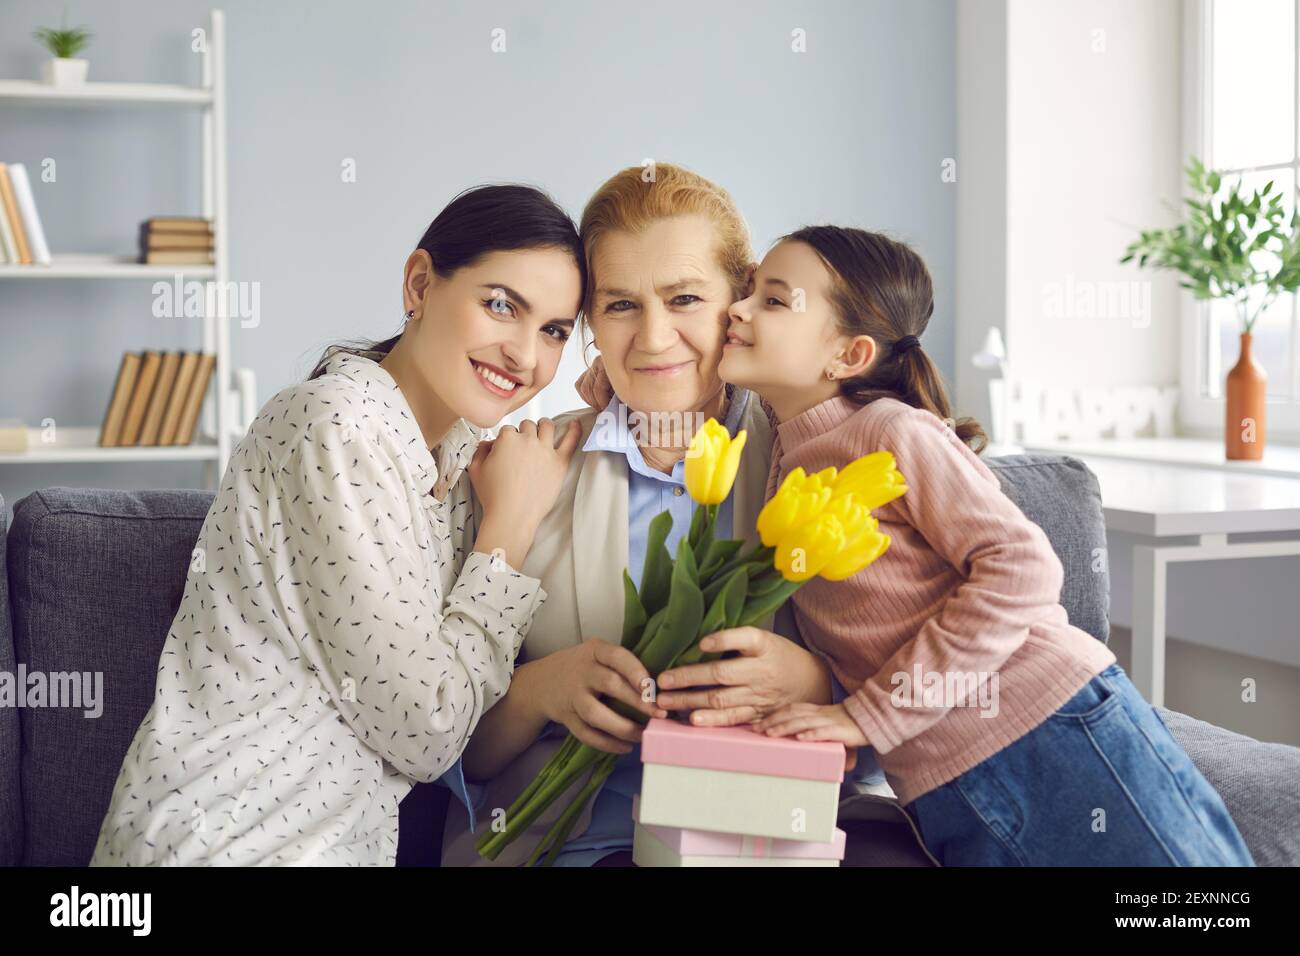 Portrait of three generations of women, mother, grandmother and granddaughter celebrating the event. Stock Photo